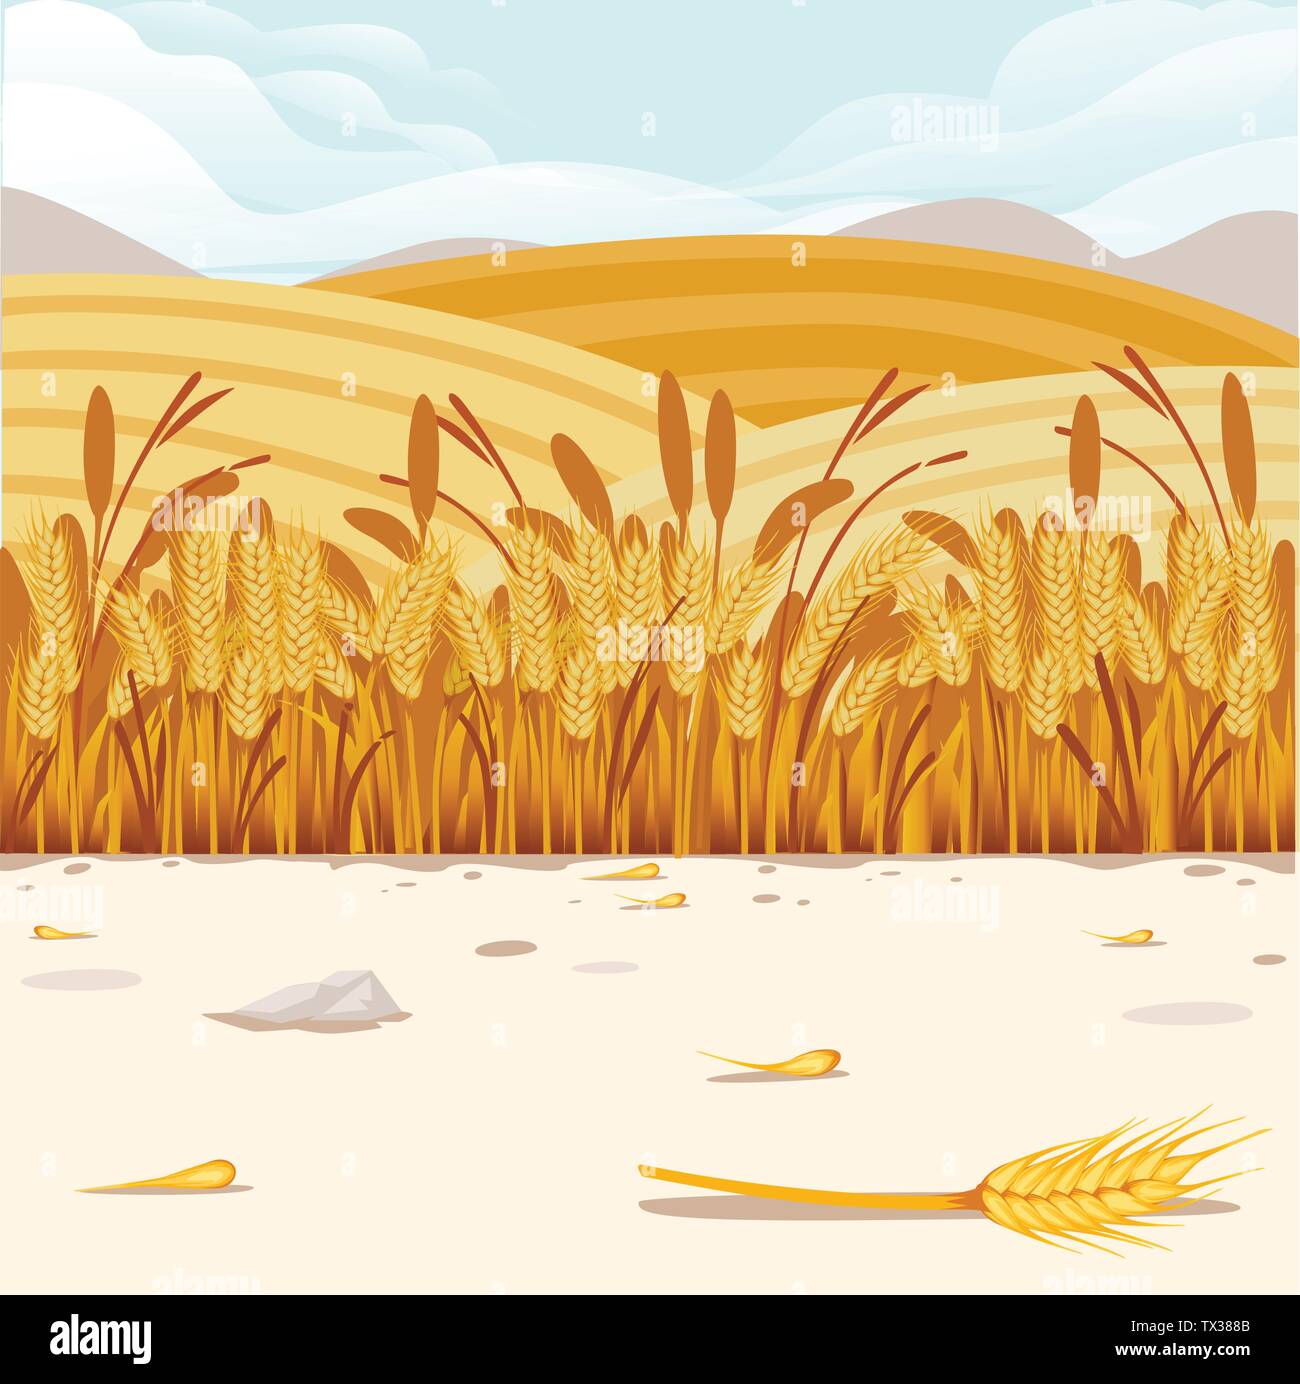 Wheat field illustration with rural landscape and good sunny day on background horizontal banner design Stock Vector